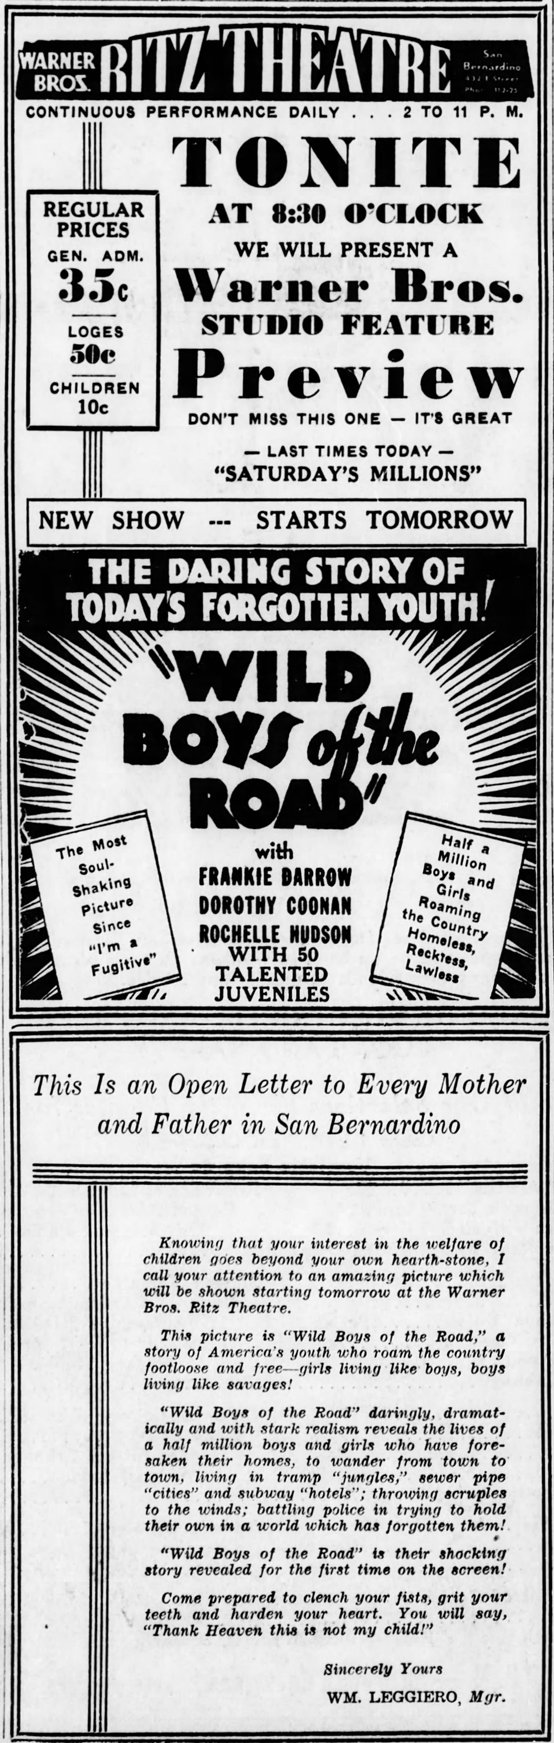 Wild Boys of the Road 1933 advertisement